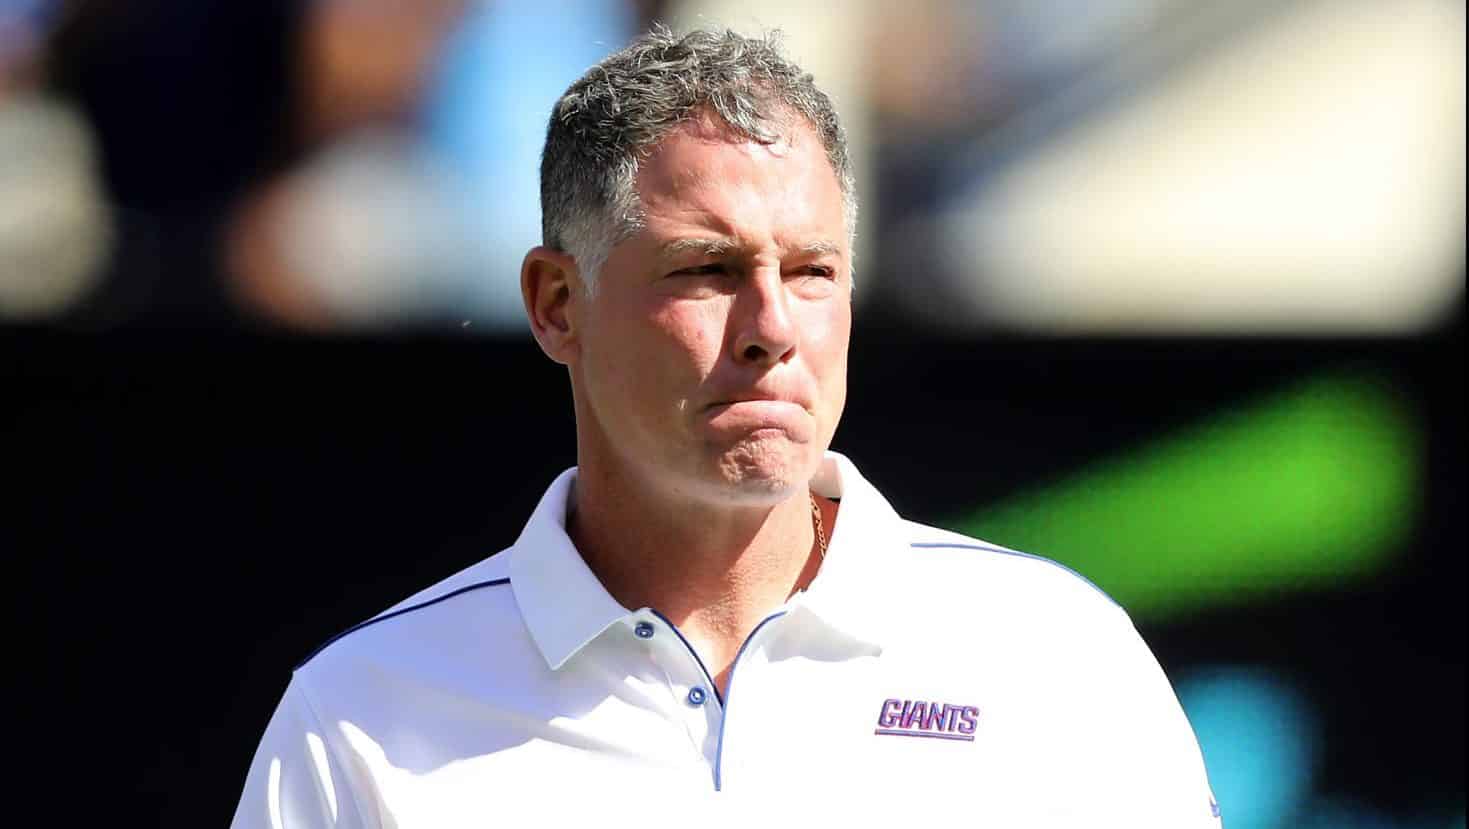 EAST RUTHERFORD, NEW JERSEY - SEPTEMBER 29: Head coach Pat Shurmur of the New York Giants walks on the field during warm ups before the game against the Washington Redskins at MetLife Stadium on September 29, 2019 in East Rutherford, New Jersey.